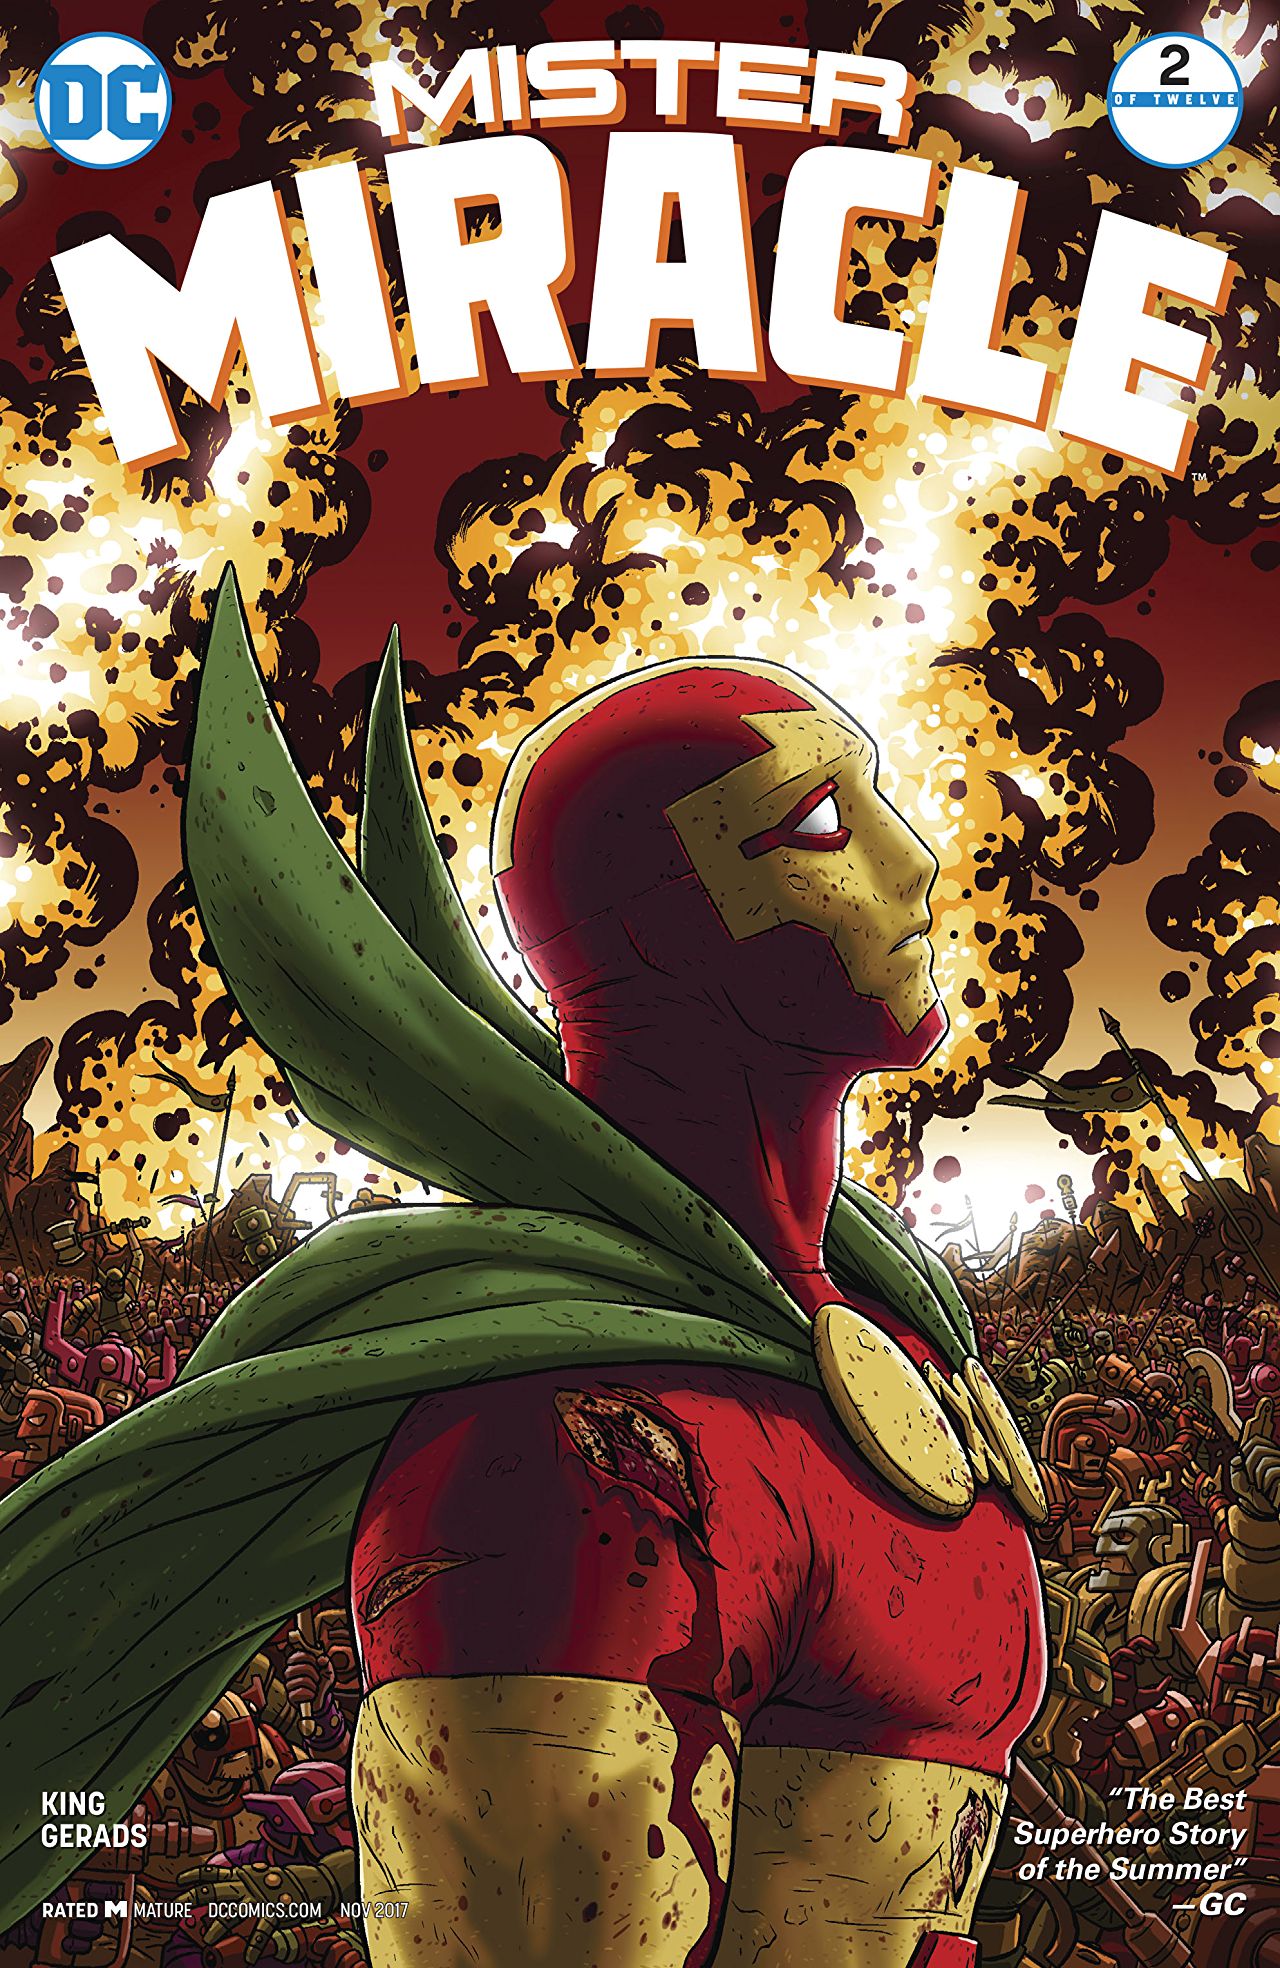 Mister Miracle #2 review: Escaping the sophomore slump